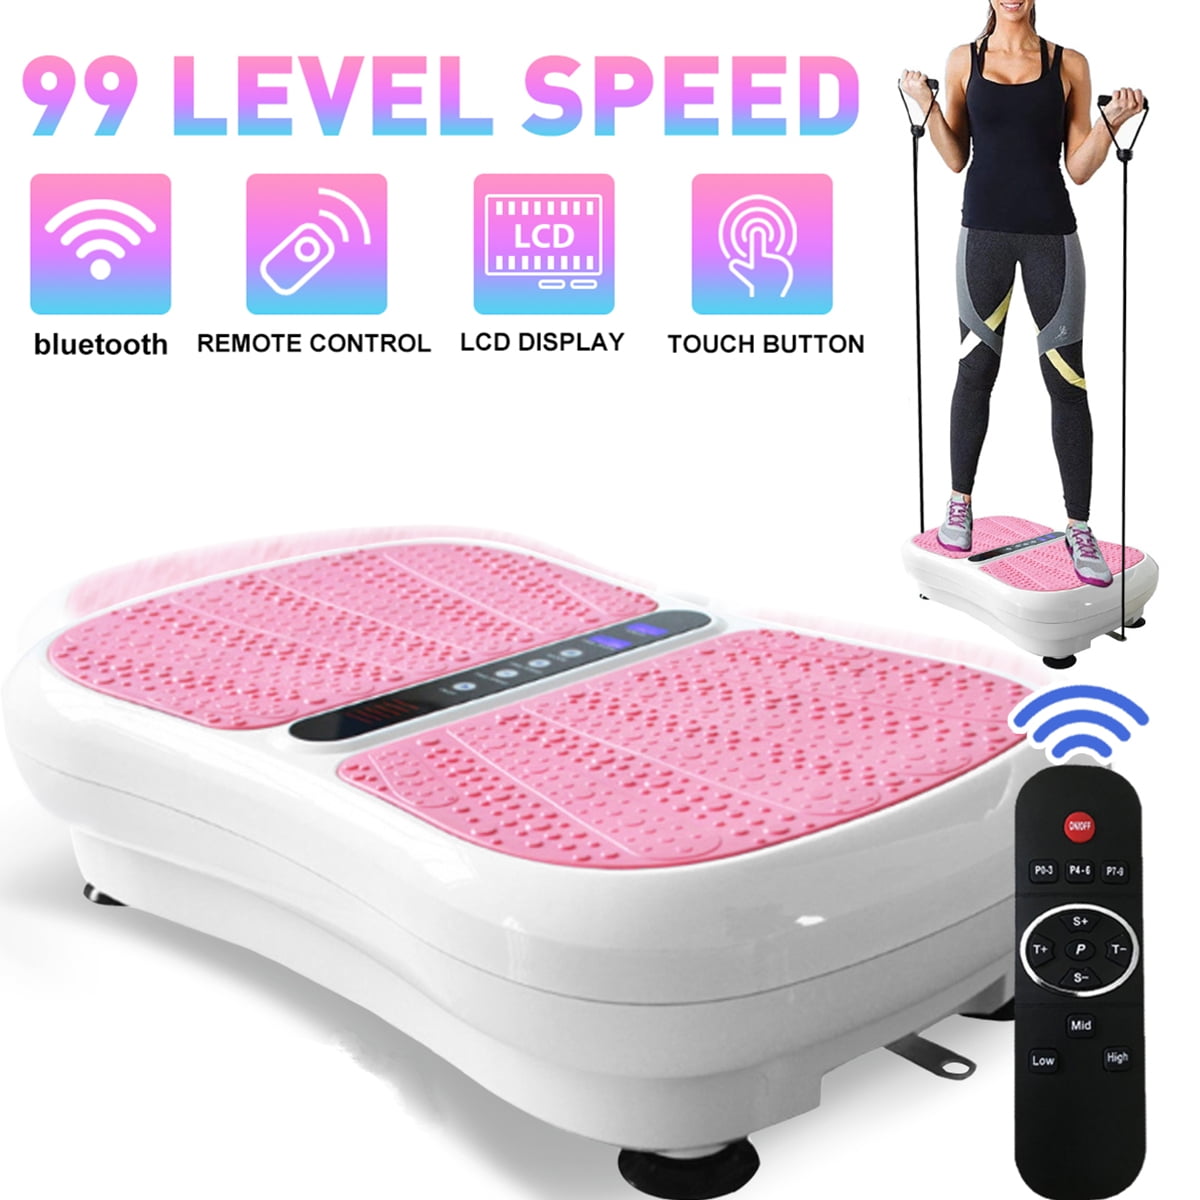 Whole Body Vibration Plat Vibration Plate Machine Balance Body Exercise Equipment for Home and Office Gym